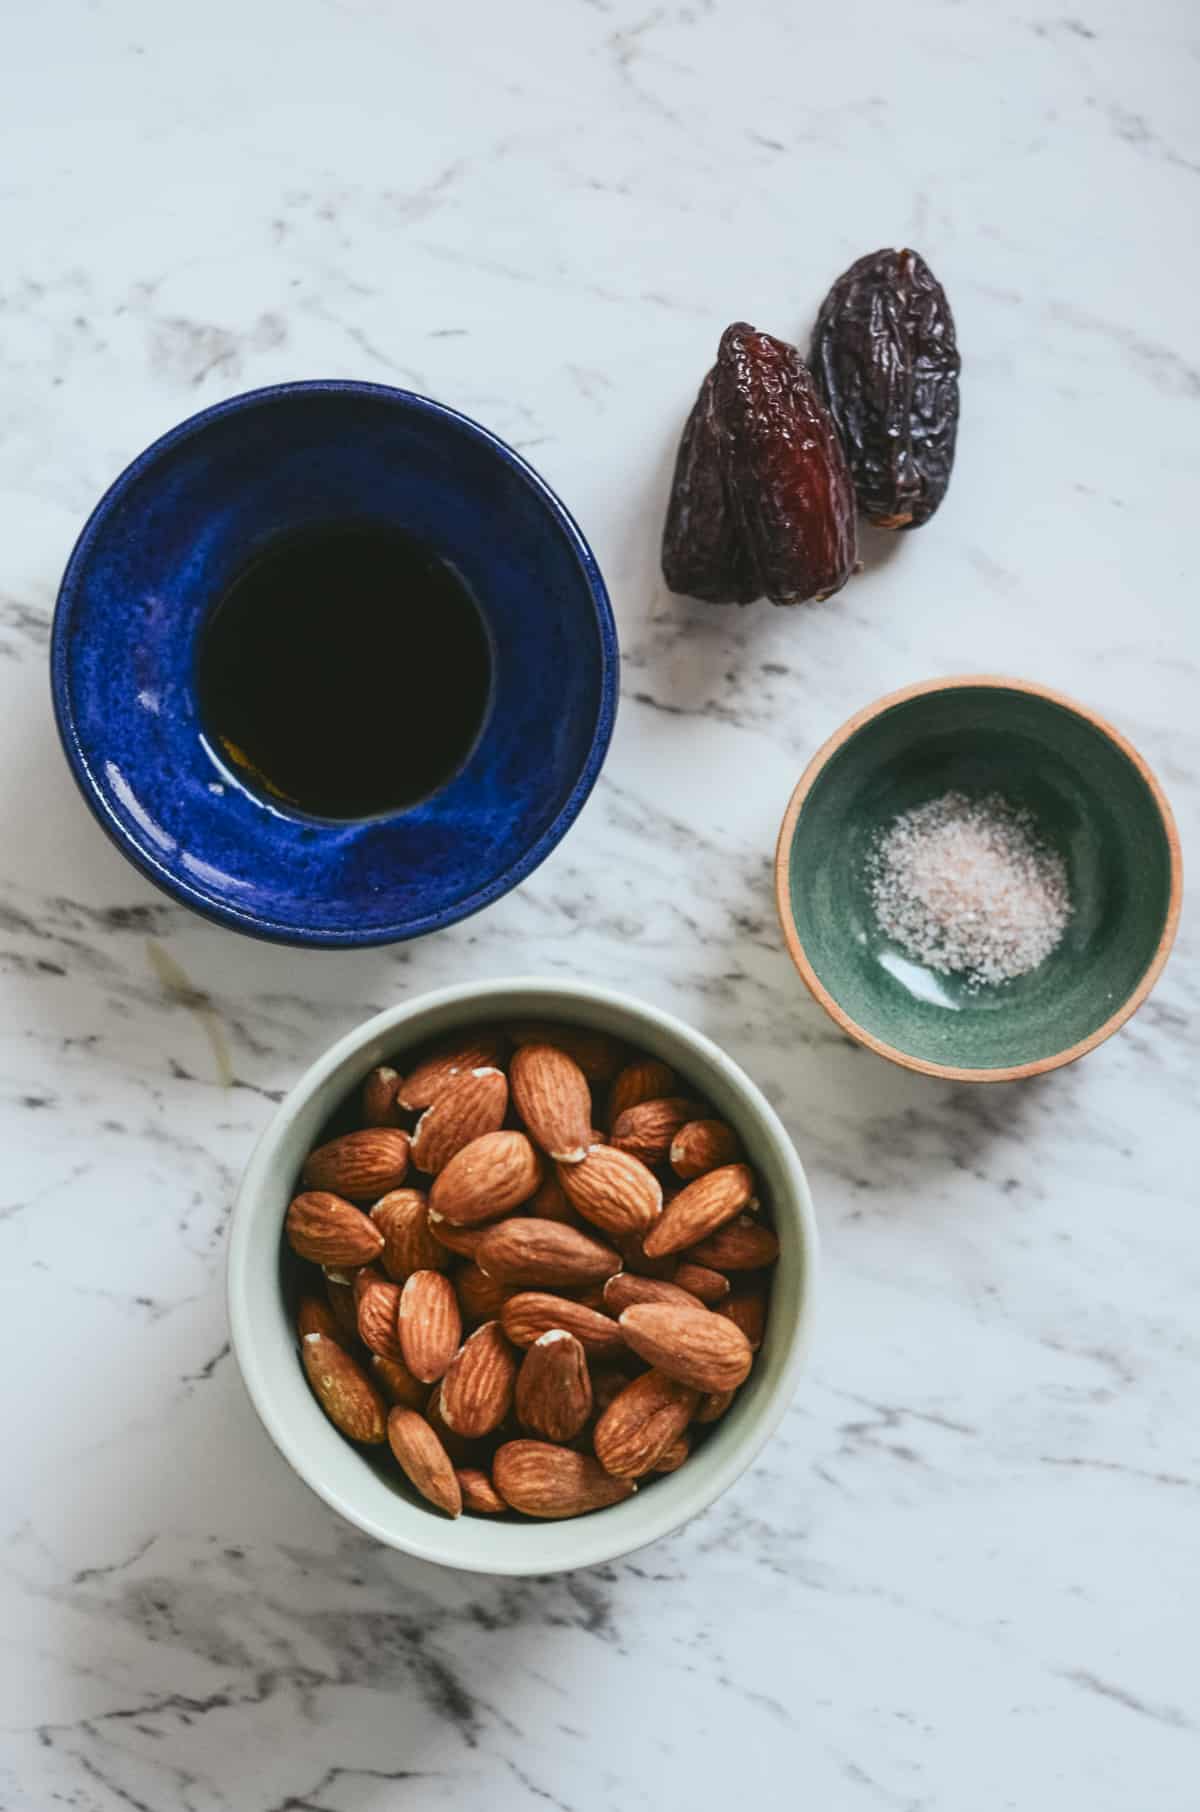 Ingredients needed for homemade almond milk in bowls, vanilla, dates, sea salt and raw almonds.